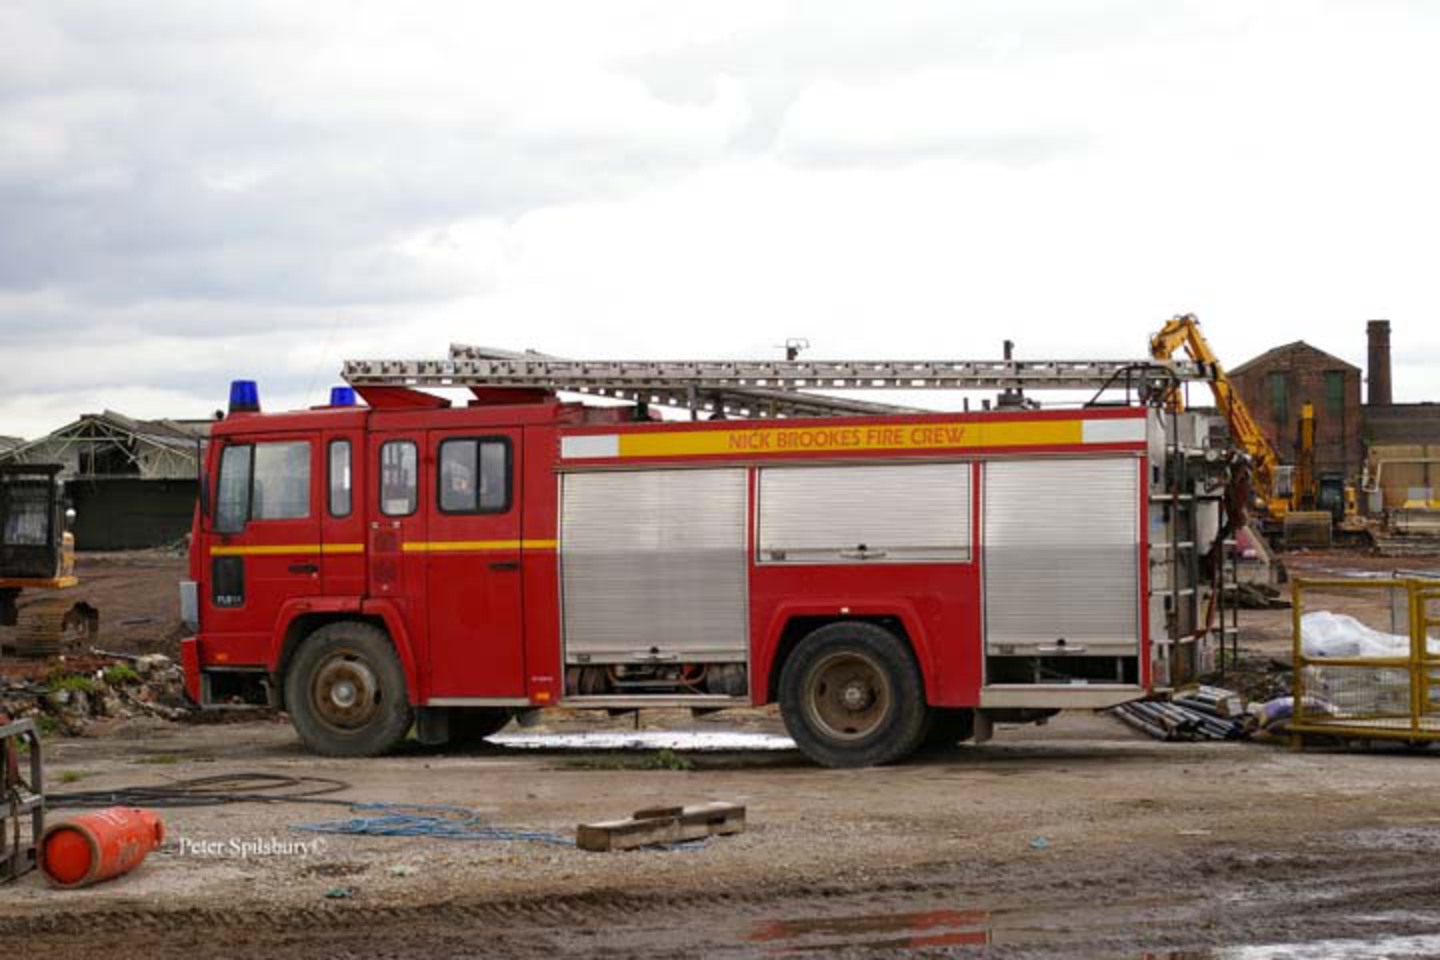 Nick Brooks Fire crew Volvo FL9 Nick Brookes' appliance during the